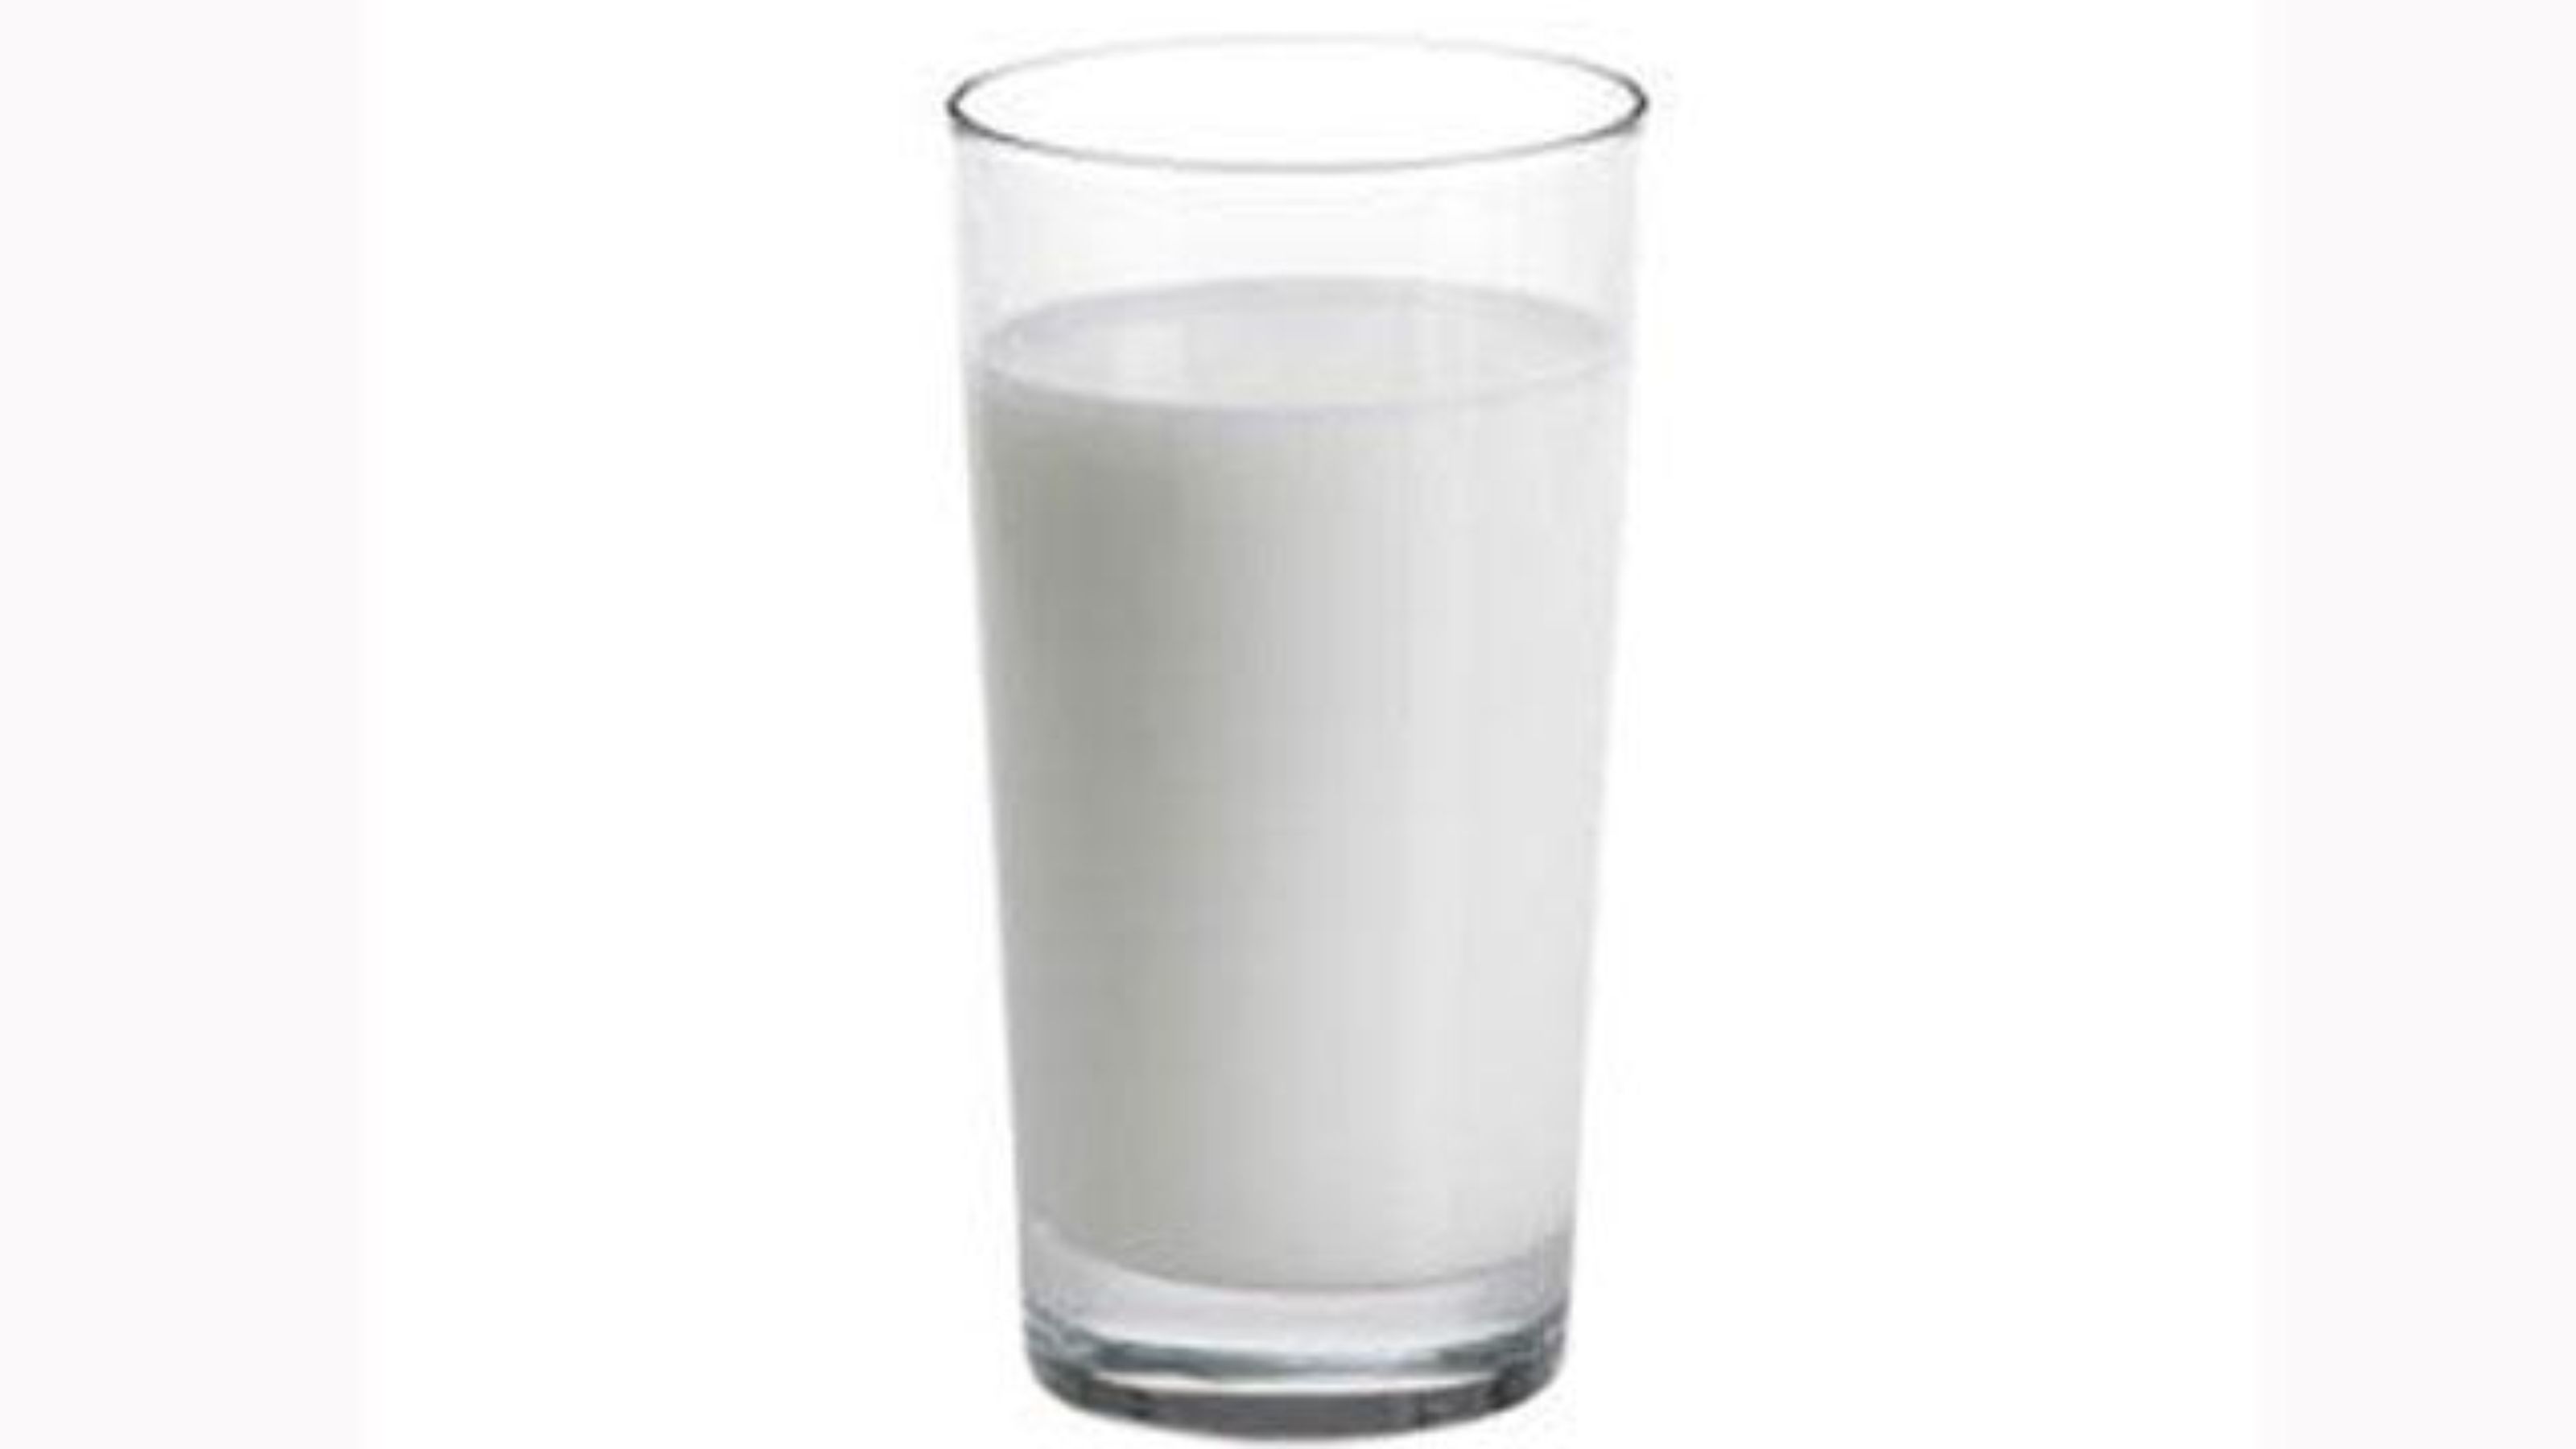 clipart of a glass of milk - photo #42